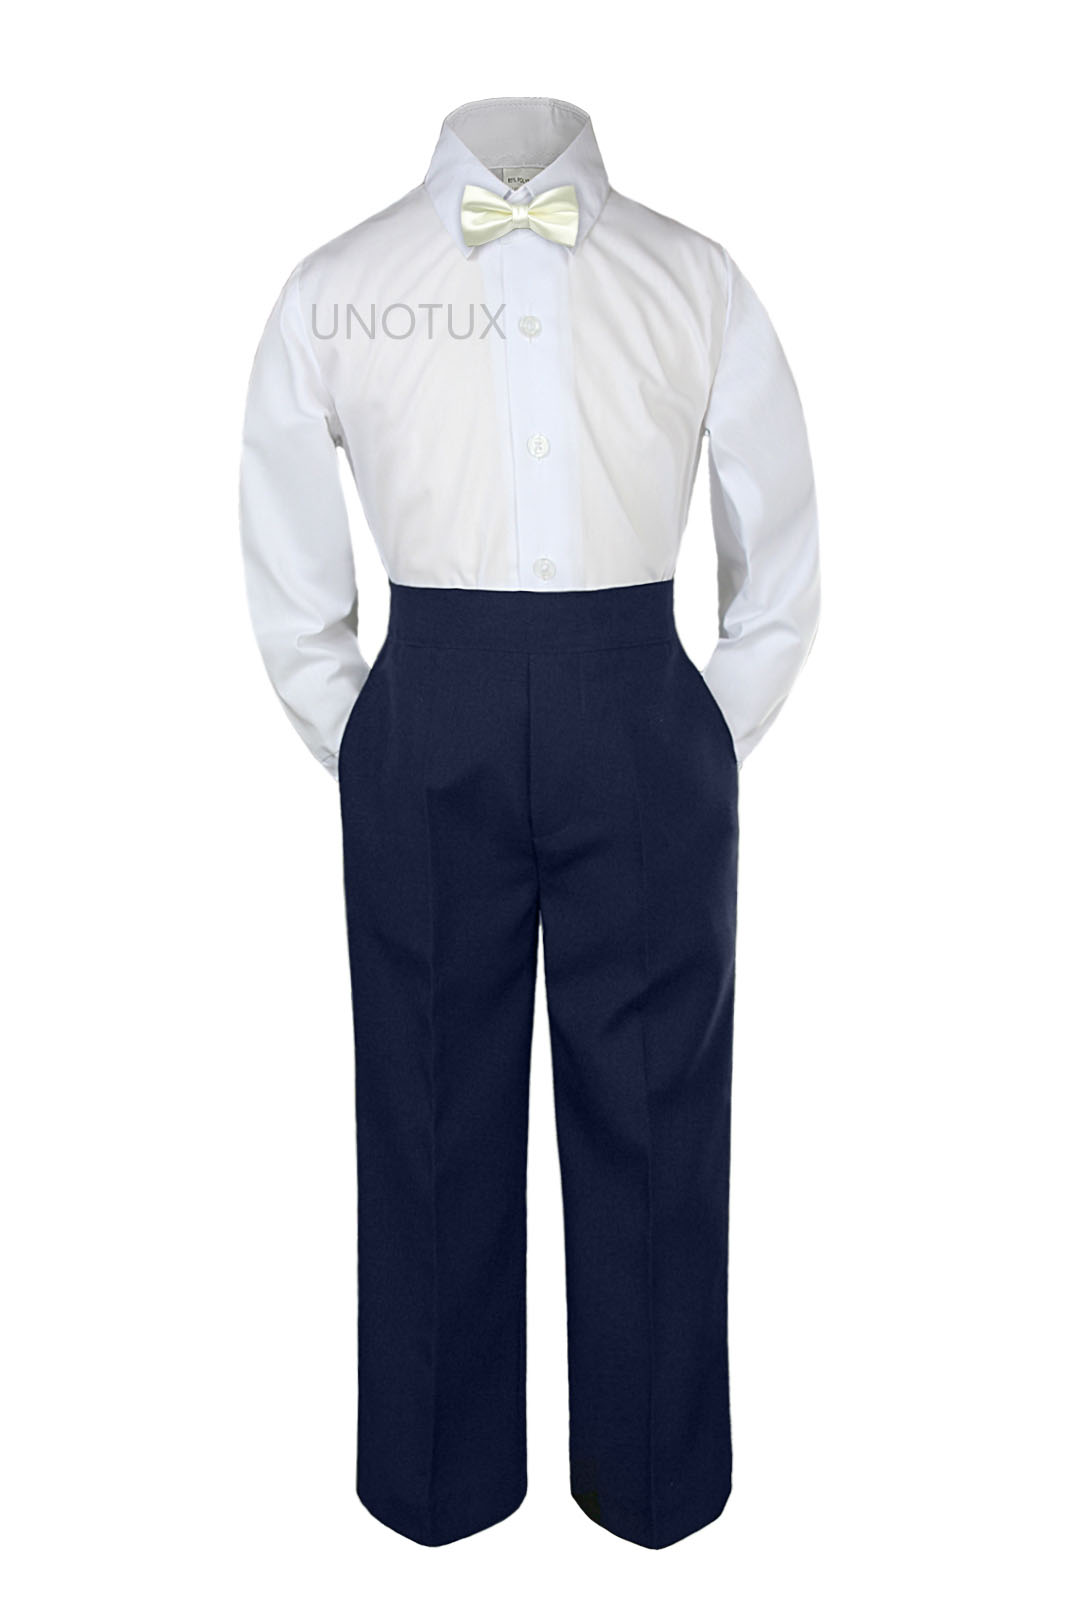 Leadertux 3pc S M L XL 2T 3T 4T Baby Toddler Boy Shirt Navy Pants Suits Separate Tuxedo Formal Wedding Party Outfits Bow Tie Set